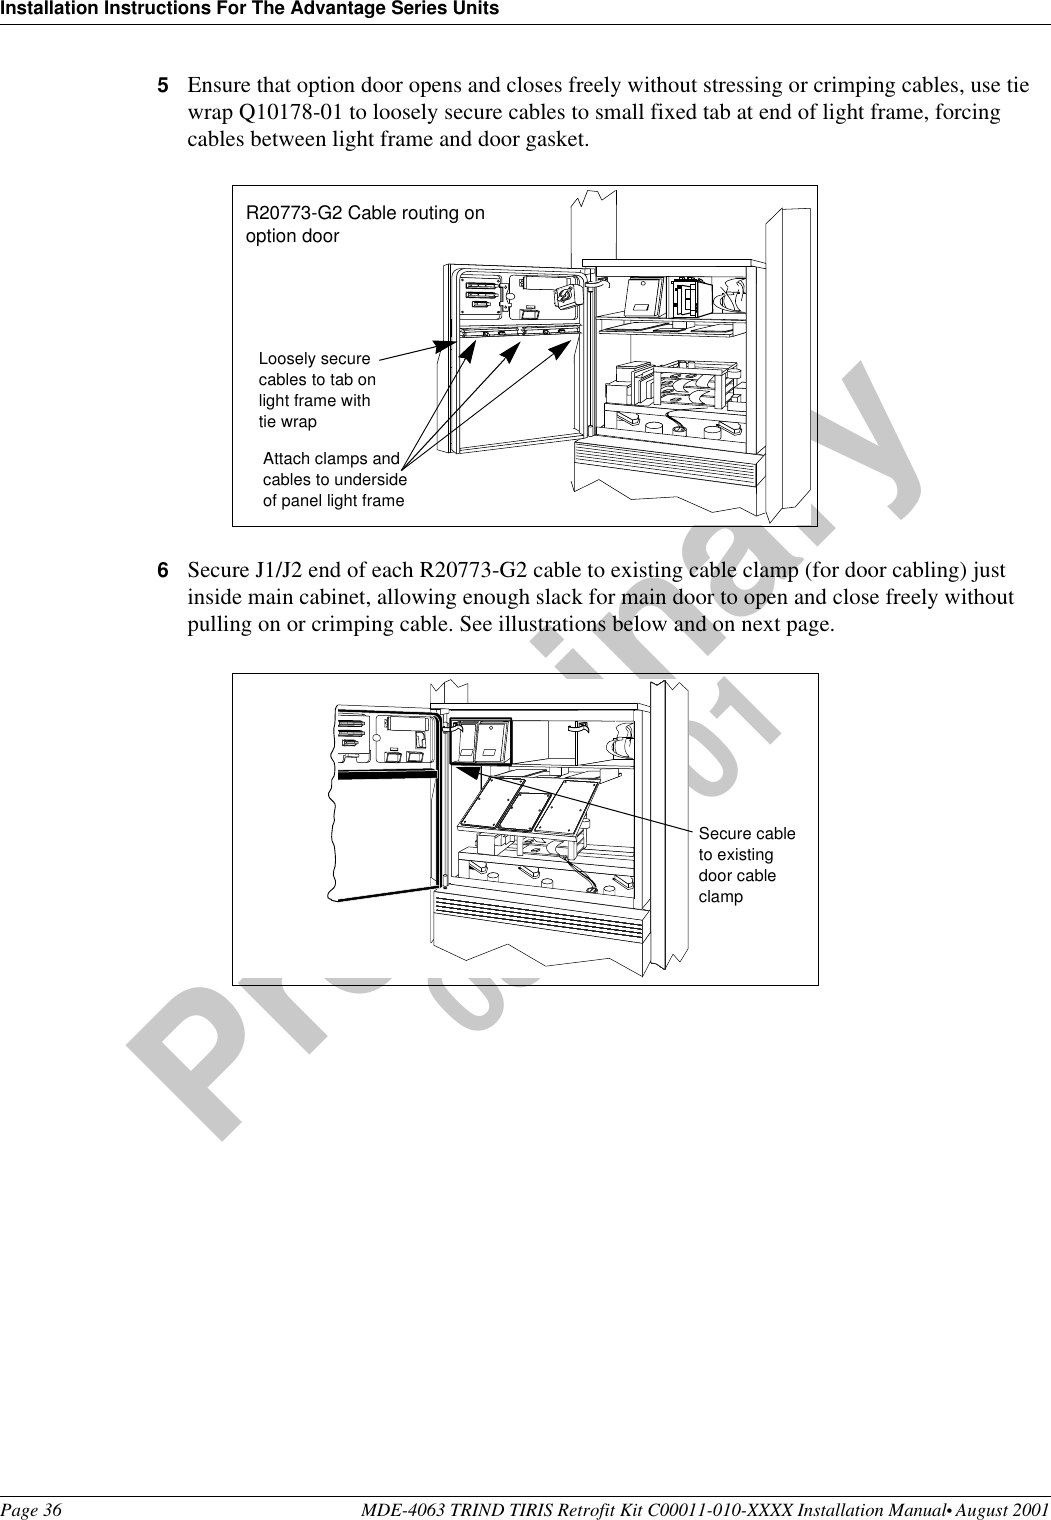 Installation Instructions For The Advantage Series UnitsPage 36 MDE-4063 TRIND TIRIS Retrofit Kit C00011-010-XXXX Installation Manual• August 2001Preliminary08-24-015Ensure that option door opens and closes freely without stressing or crimping cables, use tie wrap Q10178-01 to loosely secure cables to small fixed tab at end of light frame, forcing cables between light frame and door gasket. 6Secure J1/J2 end of each R20773-G2 cable to existing cable clamp (for door cabling) just inside main cabinet, allowing enough slack for main door to open and close freely without pulling on or crimping cable. See illustrations below and on next page.Attach clamps and cables to underside of panel light frameLoosely secure cables to tab on light frame with tie wrapR20773-G2 Cable routing on option door Secure cable to existing door cable clamp